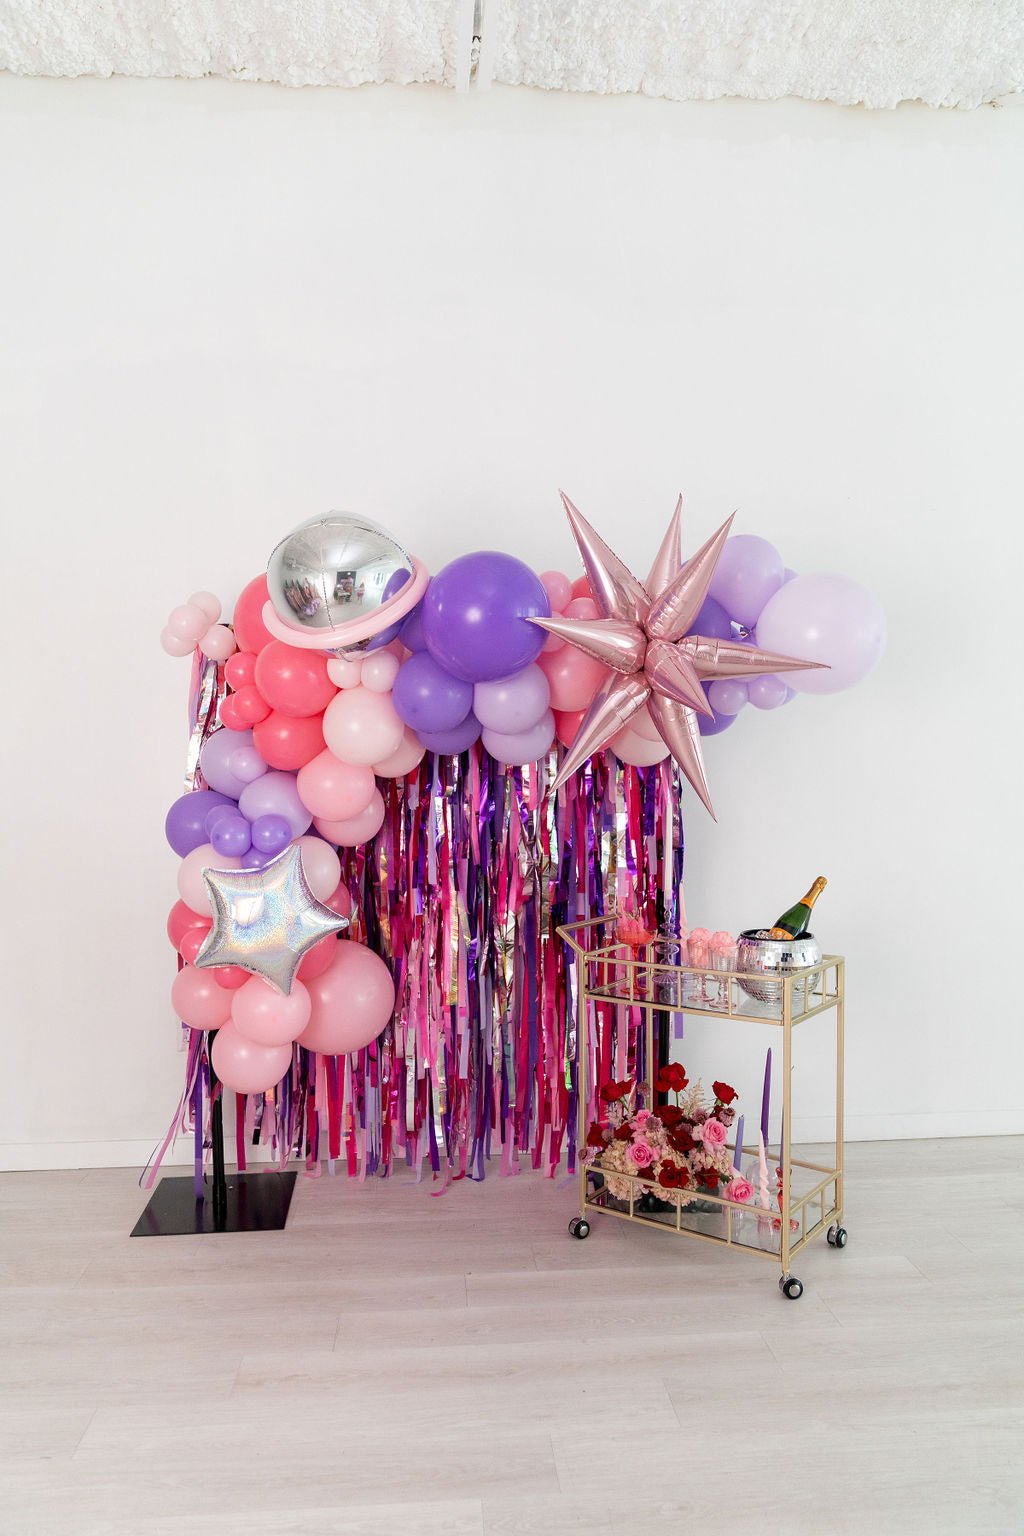 Euphoria Fringe Backdrop - Oh My Darling Party Co-bachelorette partybirthday partychristmas 22 #Fringe_Backdrop#